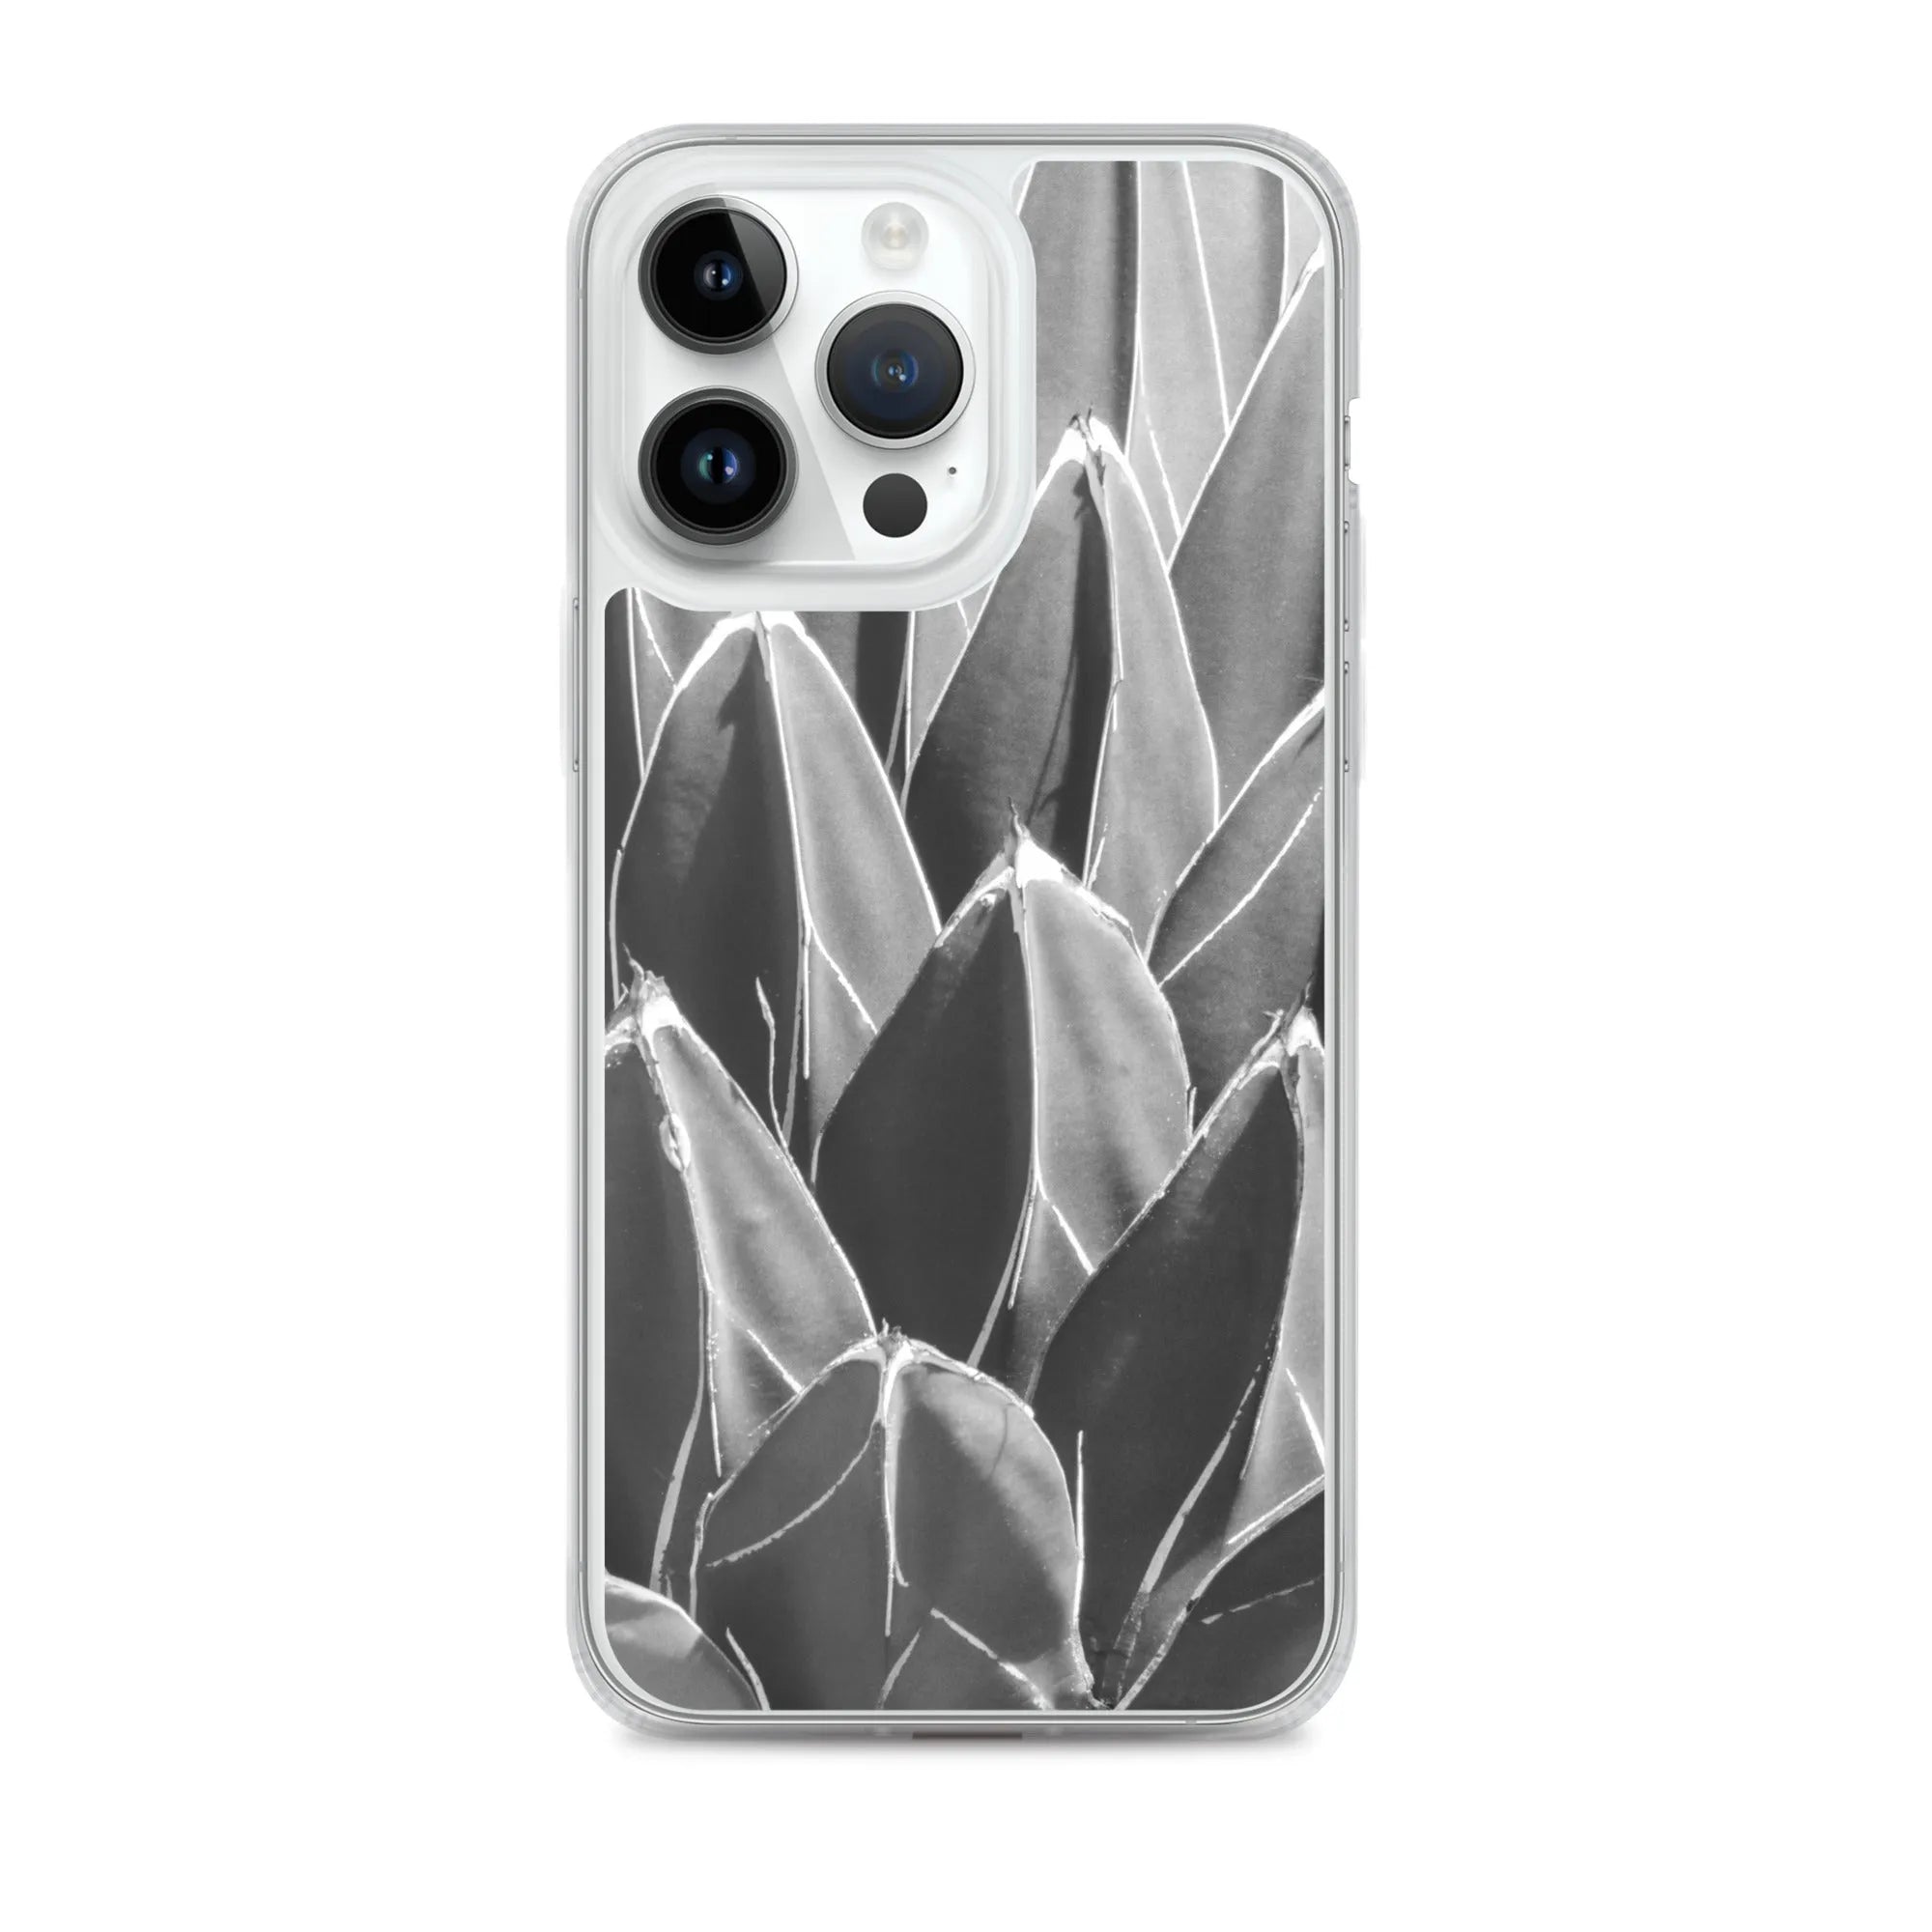 Decked Out Botanical Art Iphone Case - black And White - Iphone 14 Pro Max - Mobile Phone Cases - Aesthetic Art